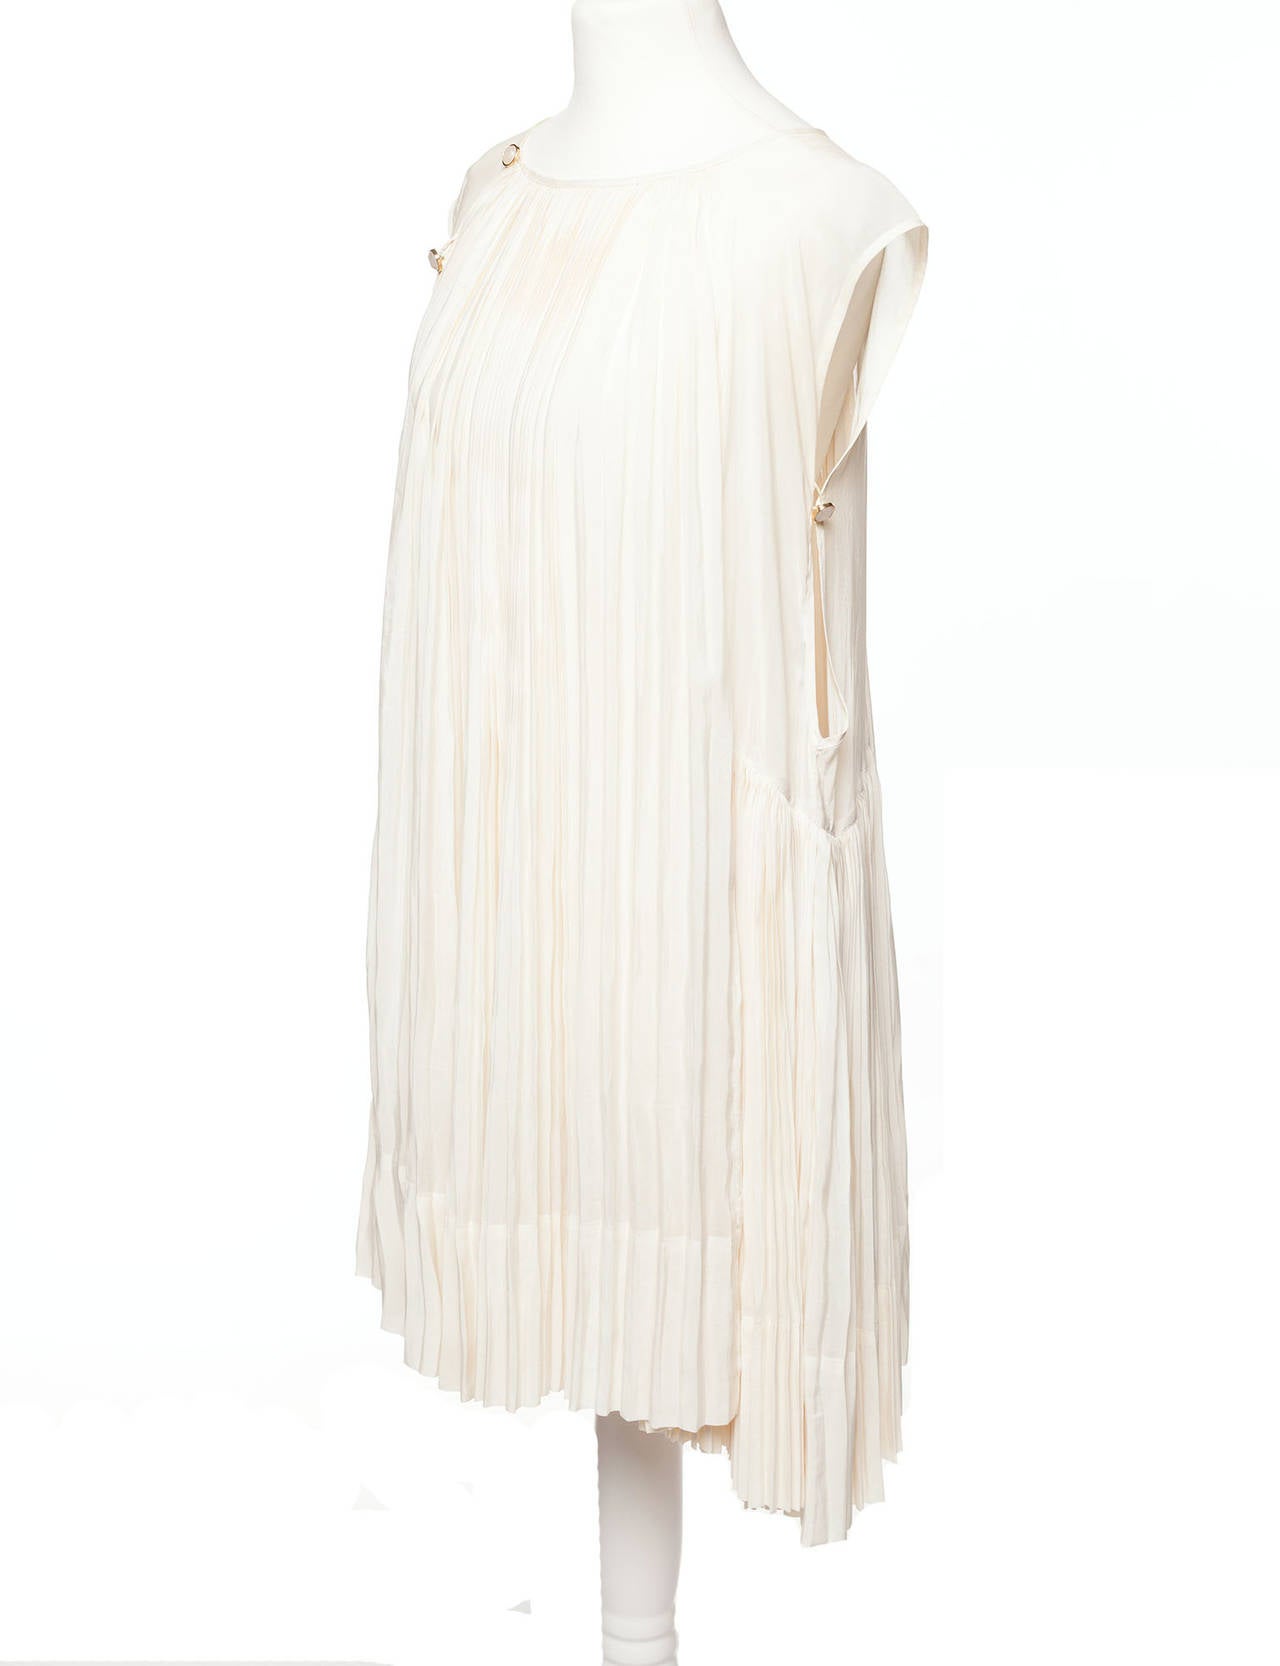 Wunderkind Silk pleated sleeveless dress with pearl buttons, There are small discoloration marks on the button placket of dress, visible only closeup.